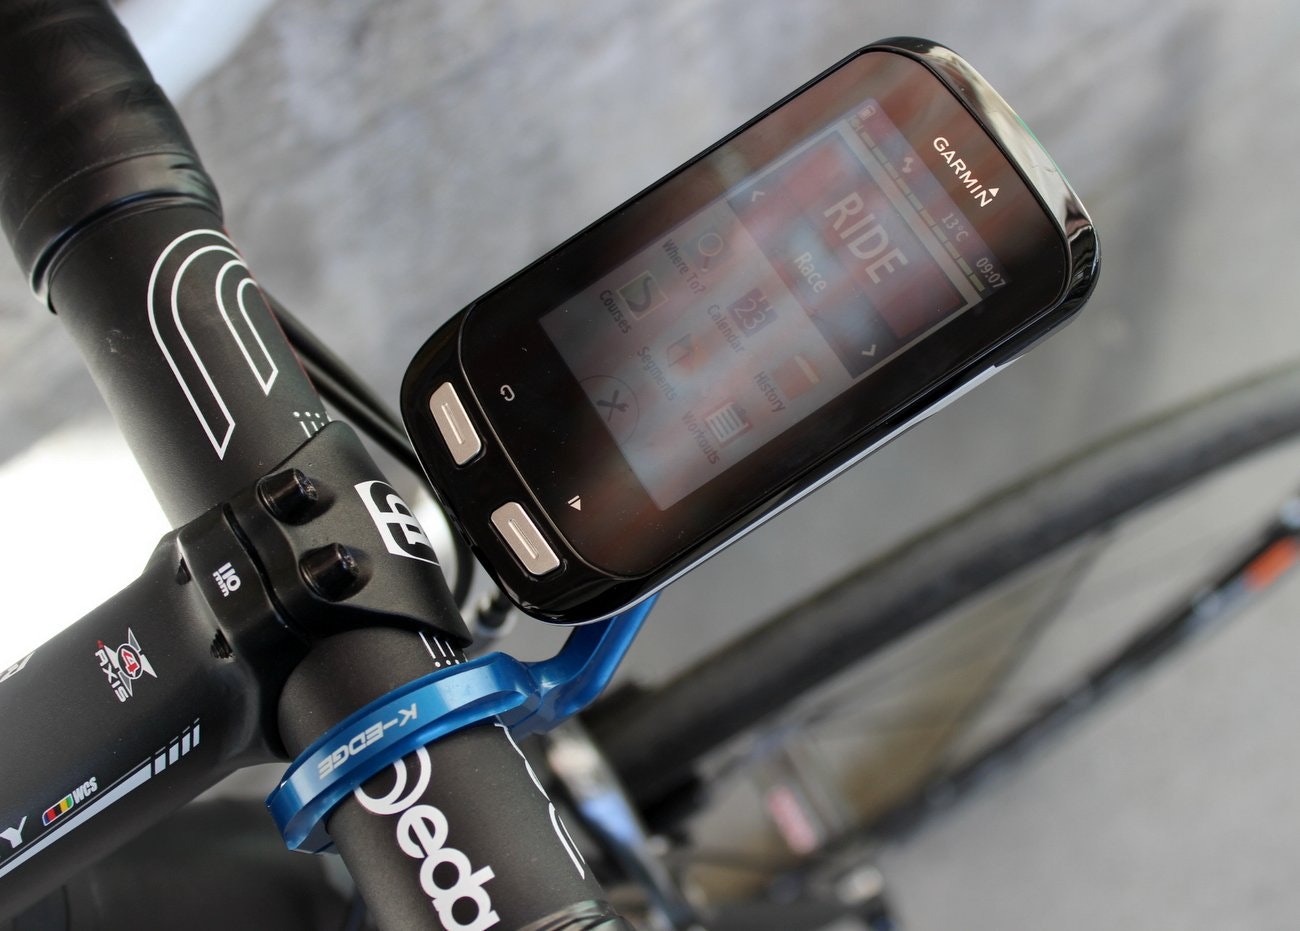 K-Edge XL out-front computer mount for Garmin Edge 1000 (Pic: George Scott/Factory Media)